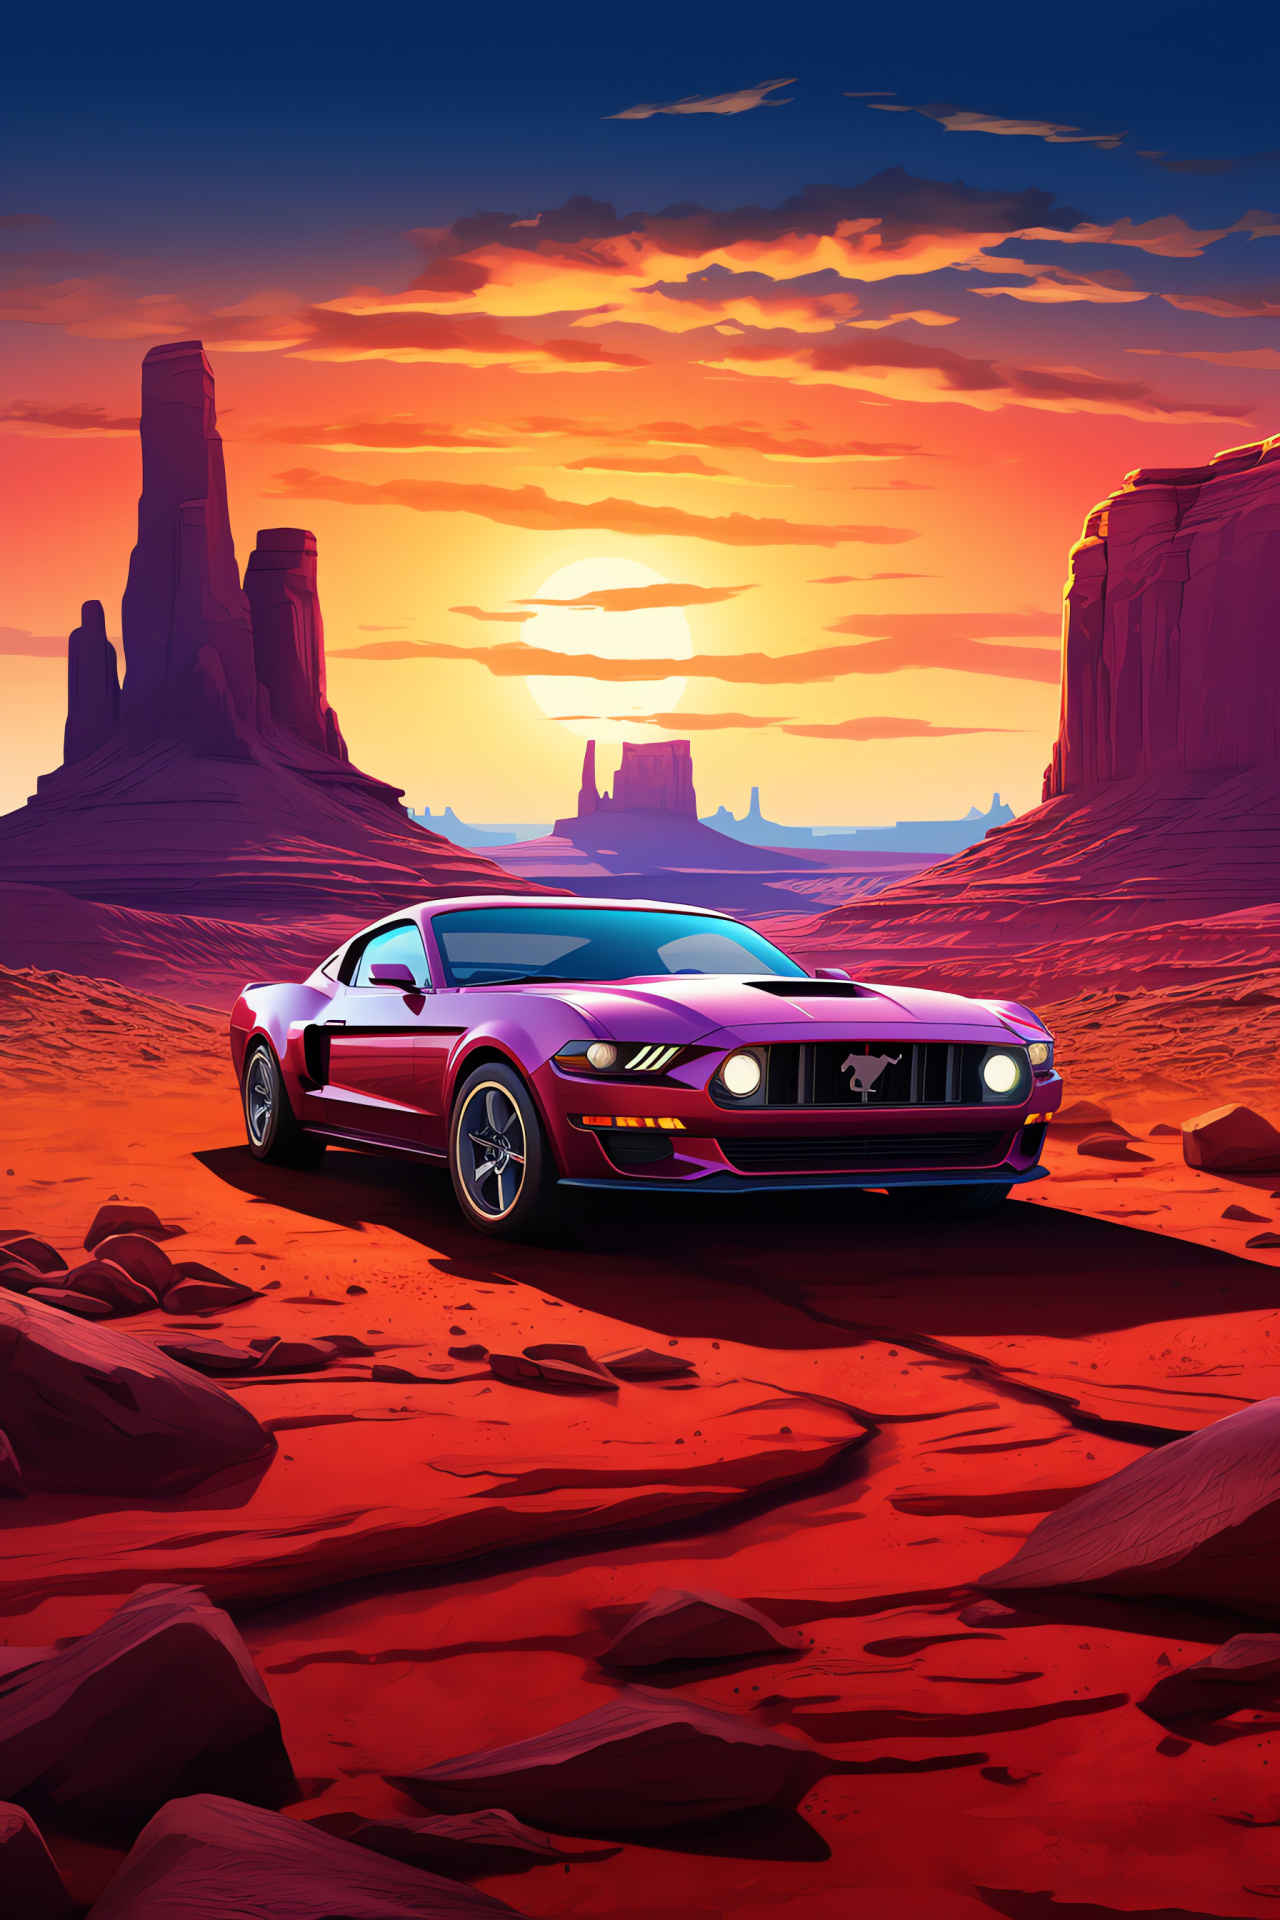 Ford Mustang, Surreal natural setting, Automotive beauty, Scenic horizon, Distinctive style, HD Phone Wallpaper